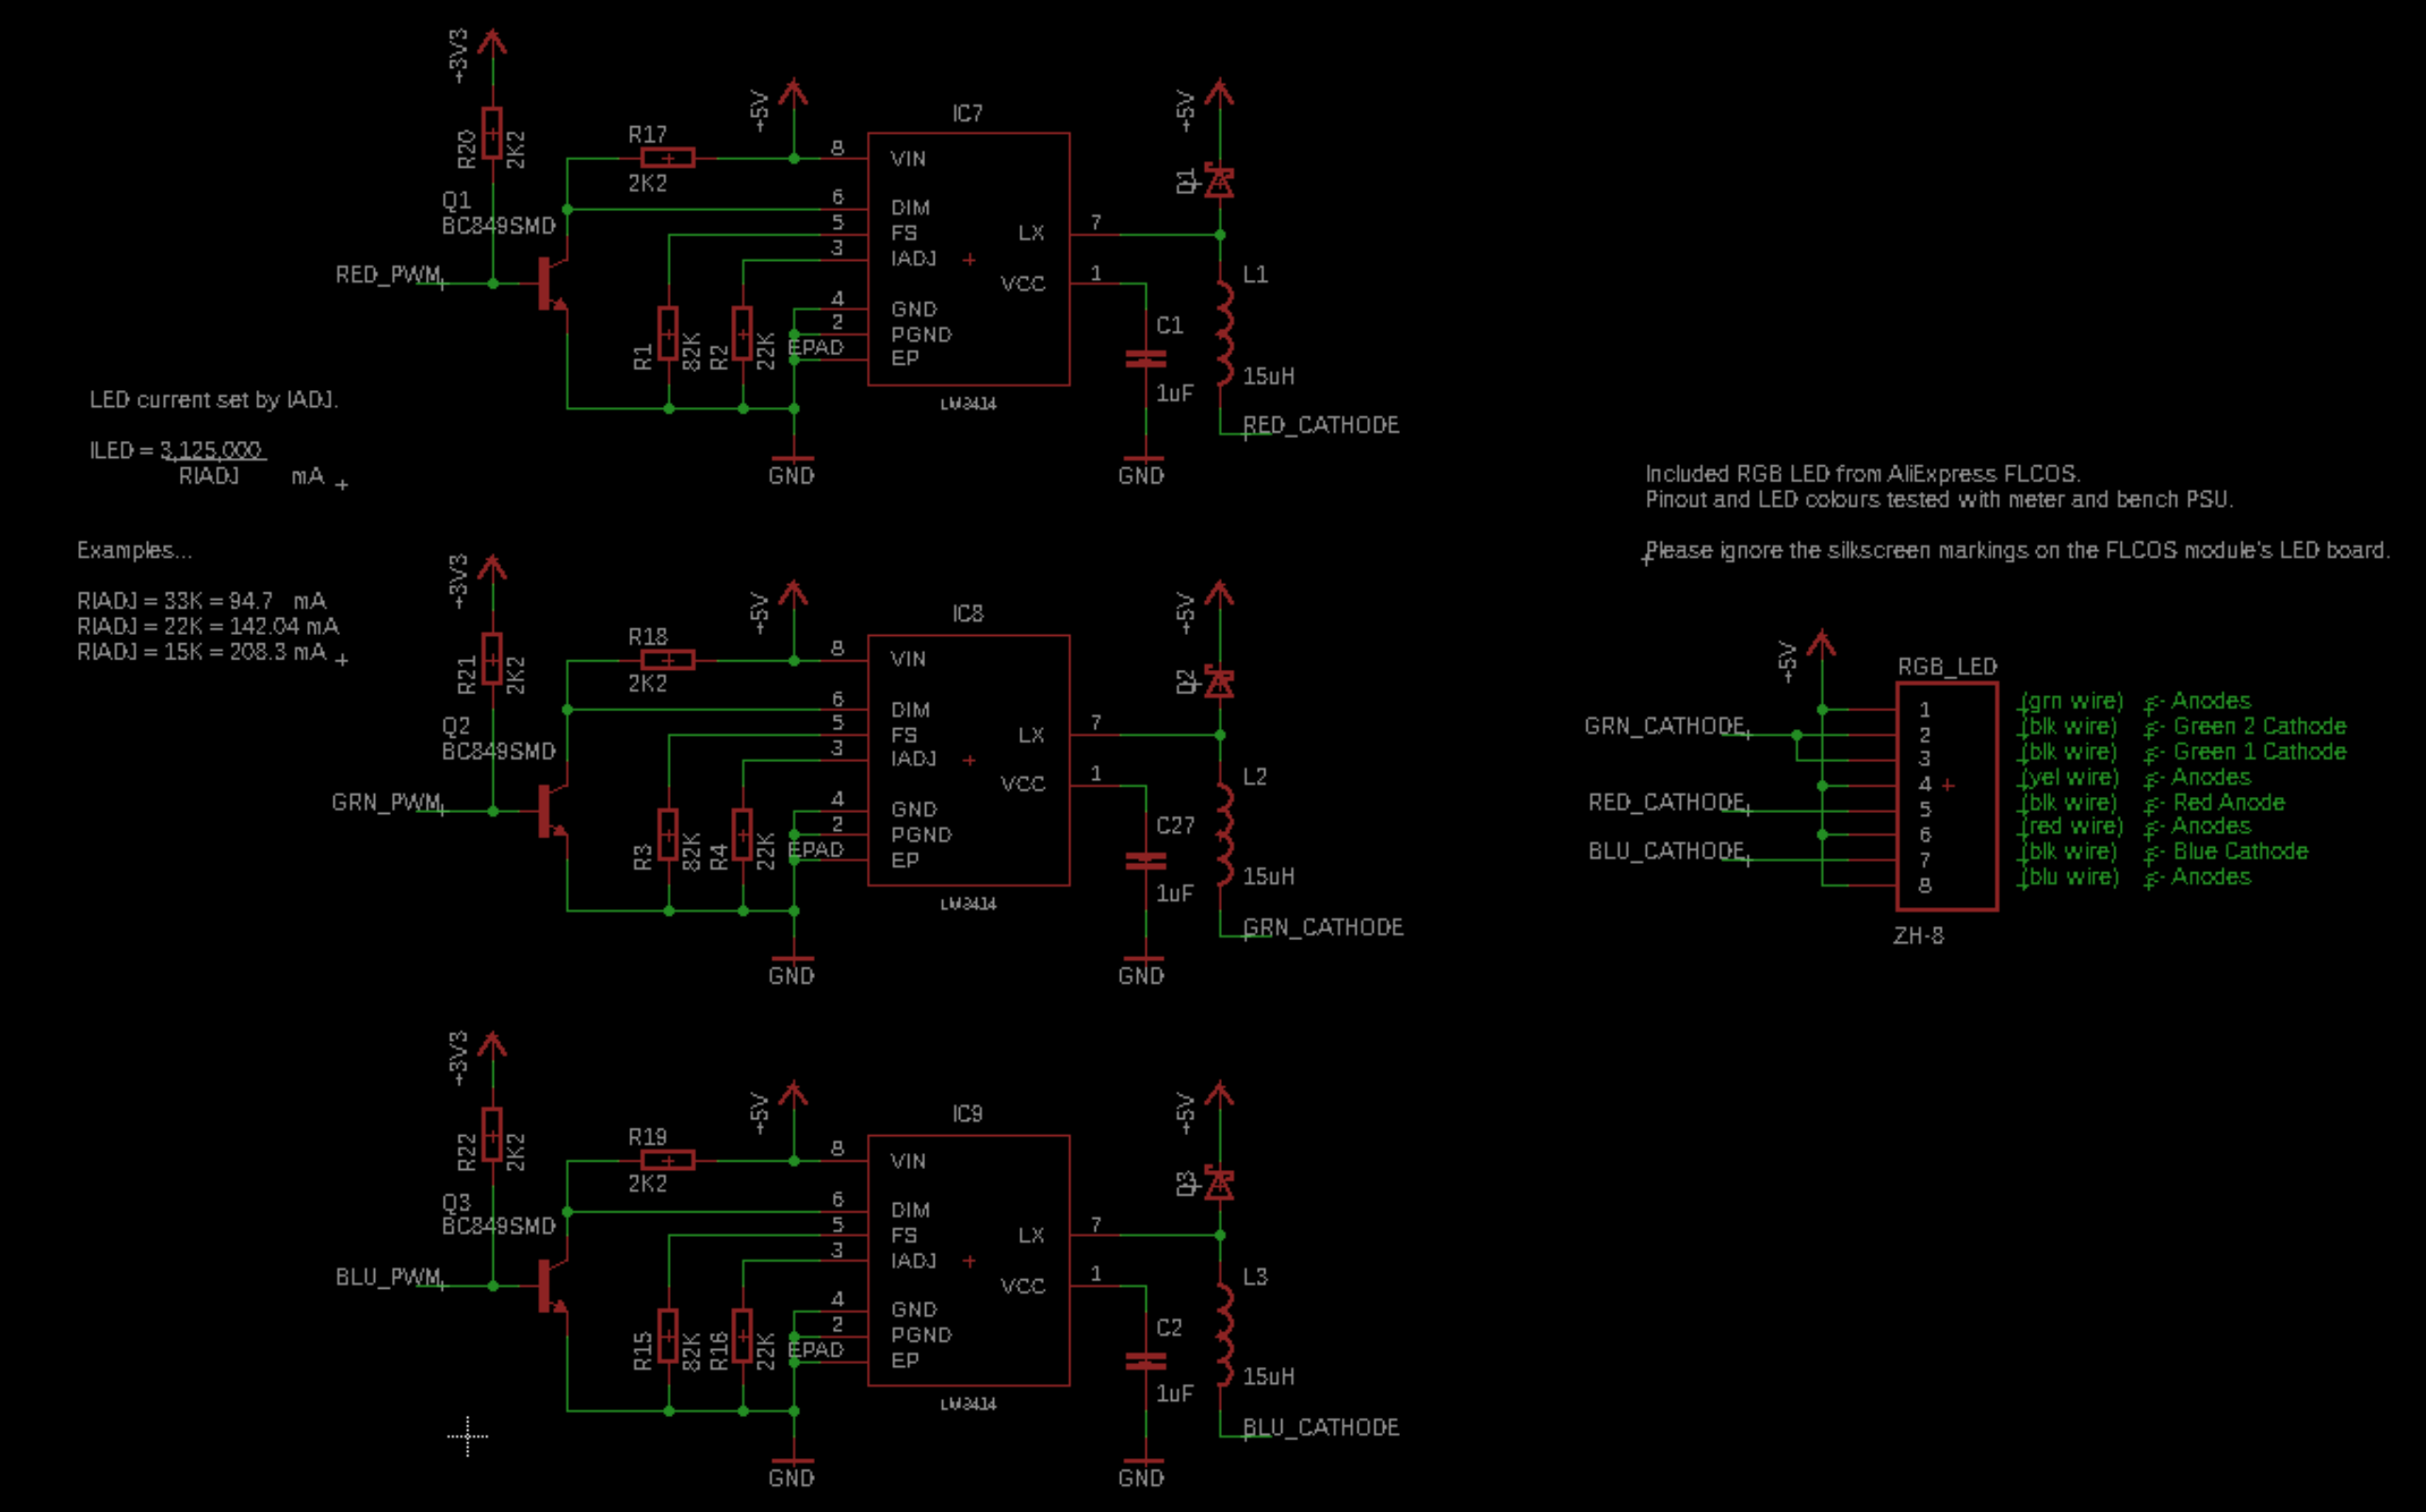 FLCOS_Schematic_Eagle_sheet_3.png